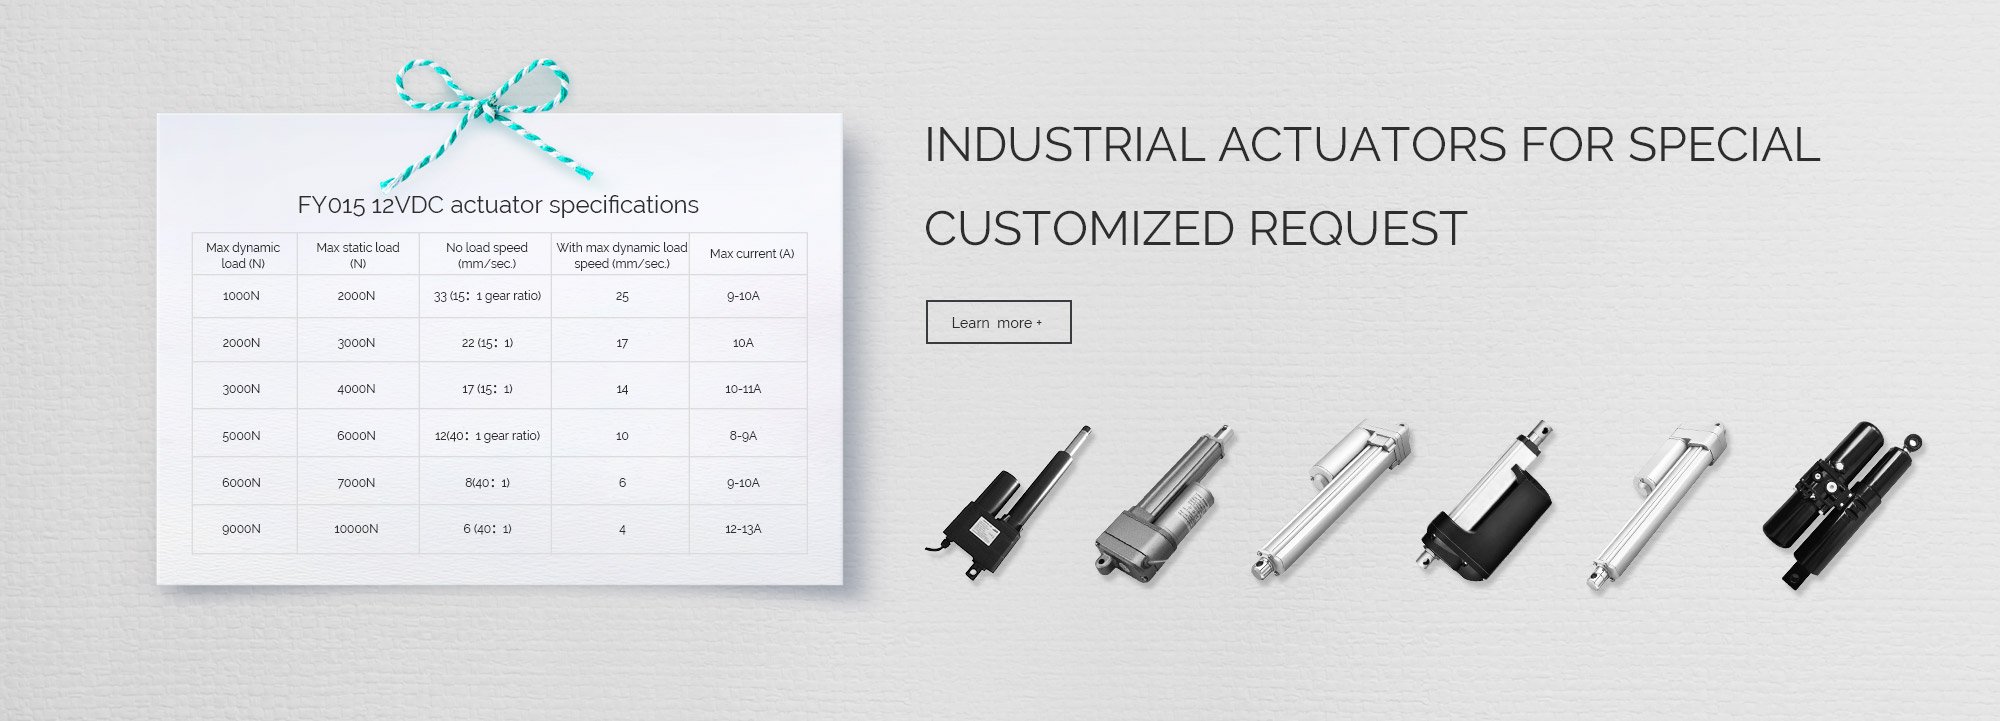 industrial actuators for special customized request